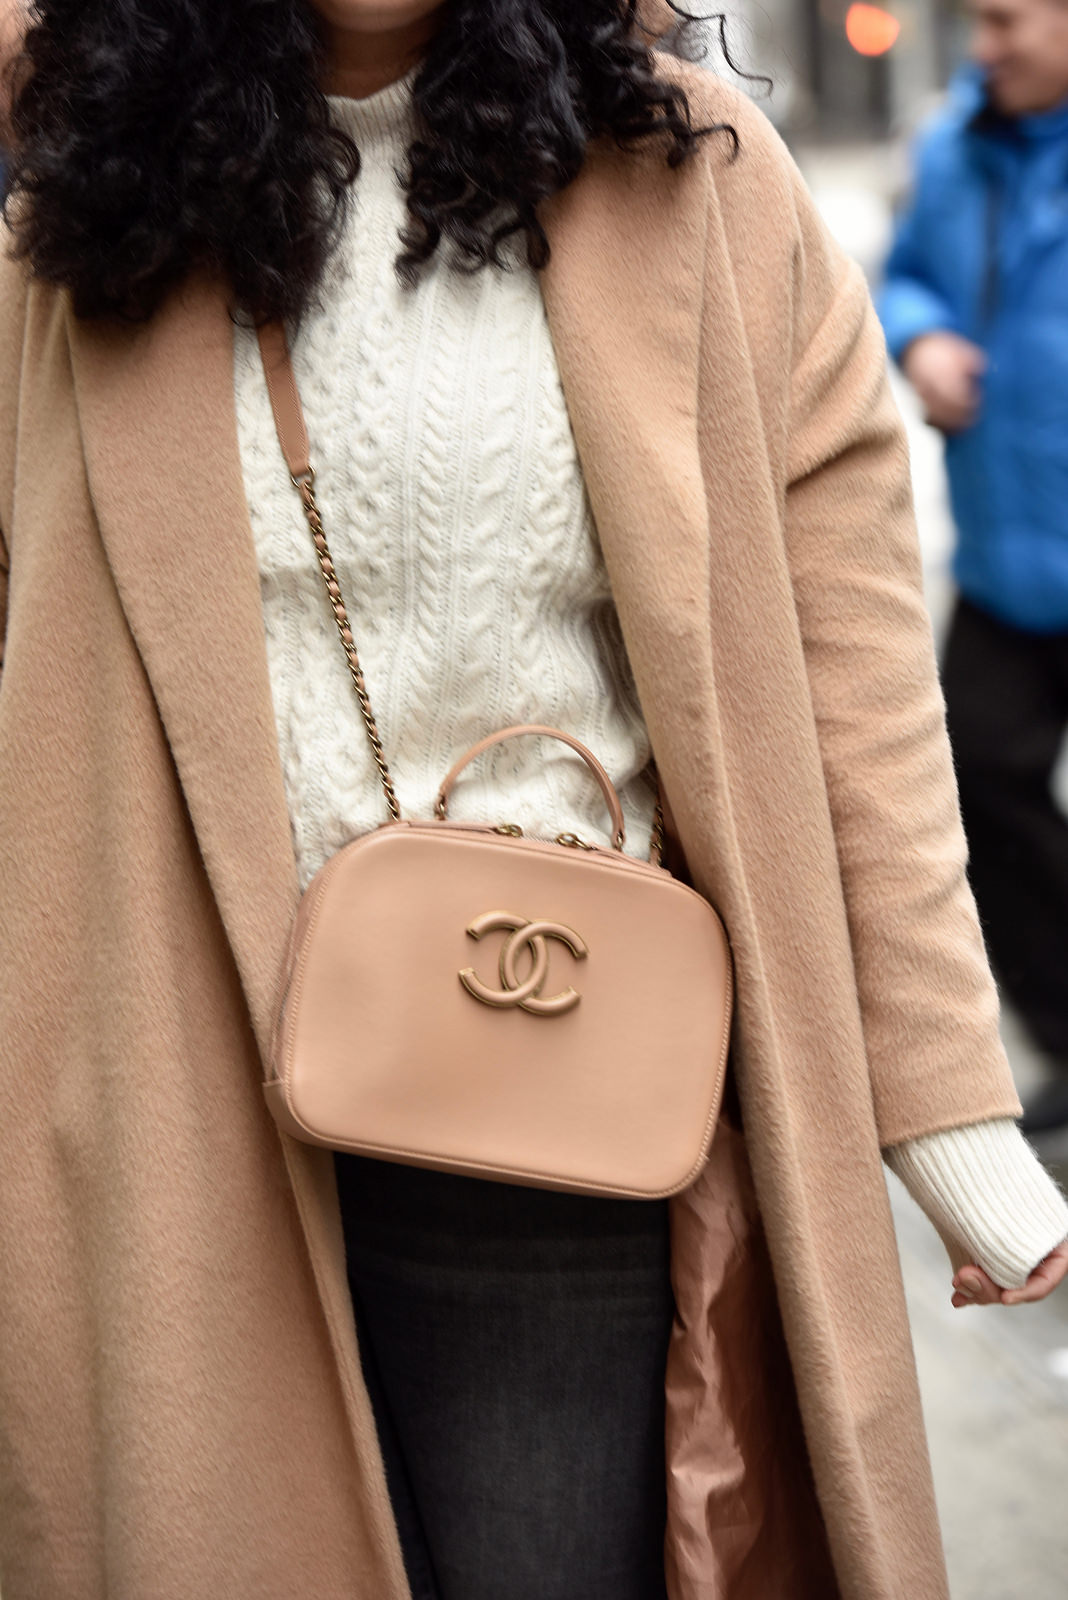 Girl with Curves featuring a camel coat from Asos, white sweater from Asos, and handbag from chanel